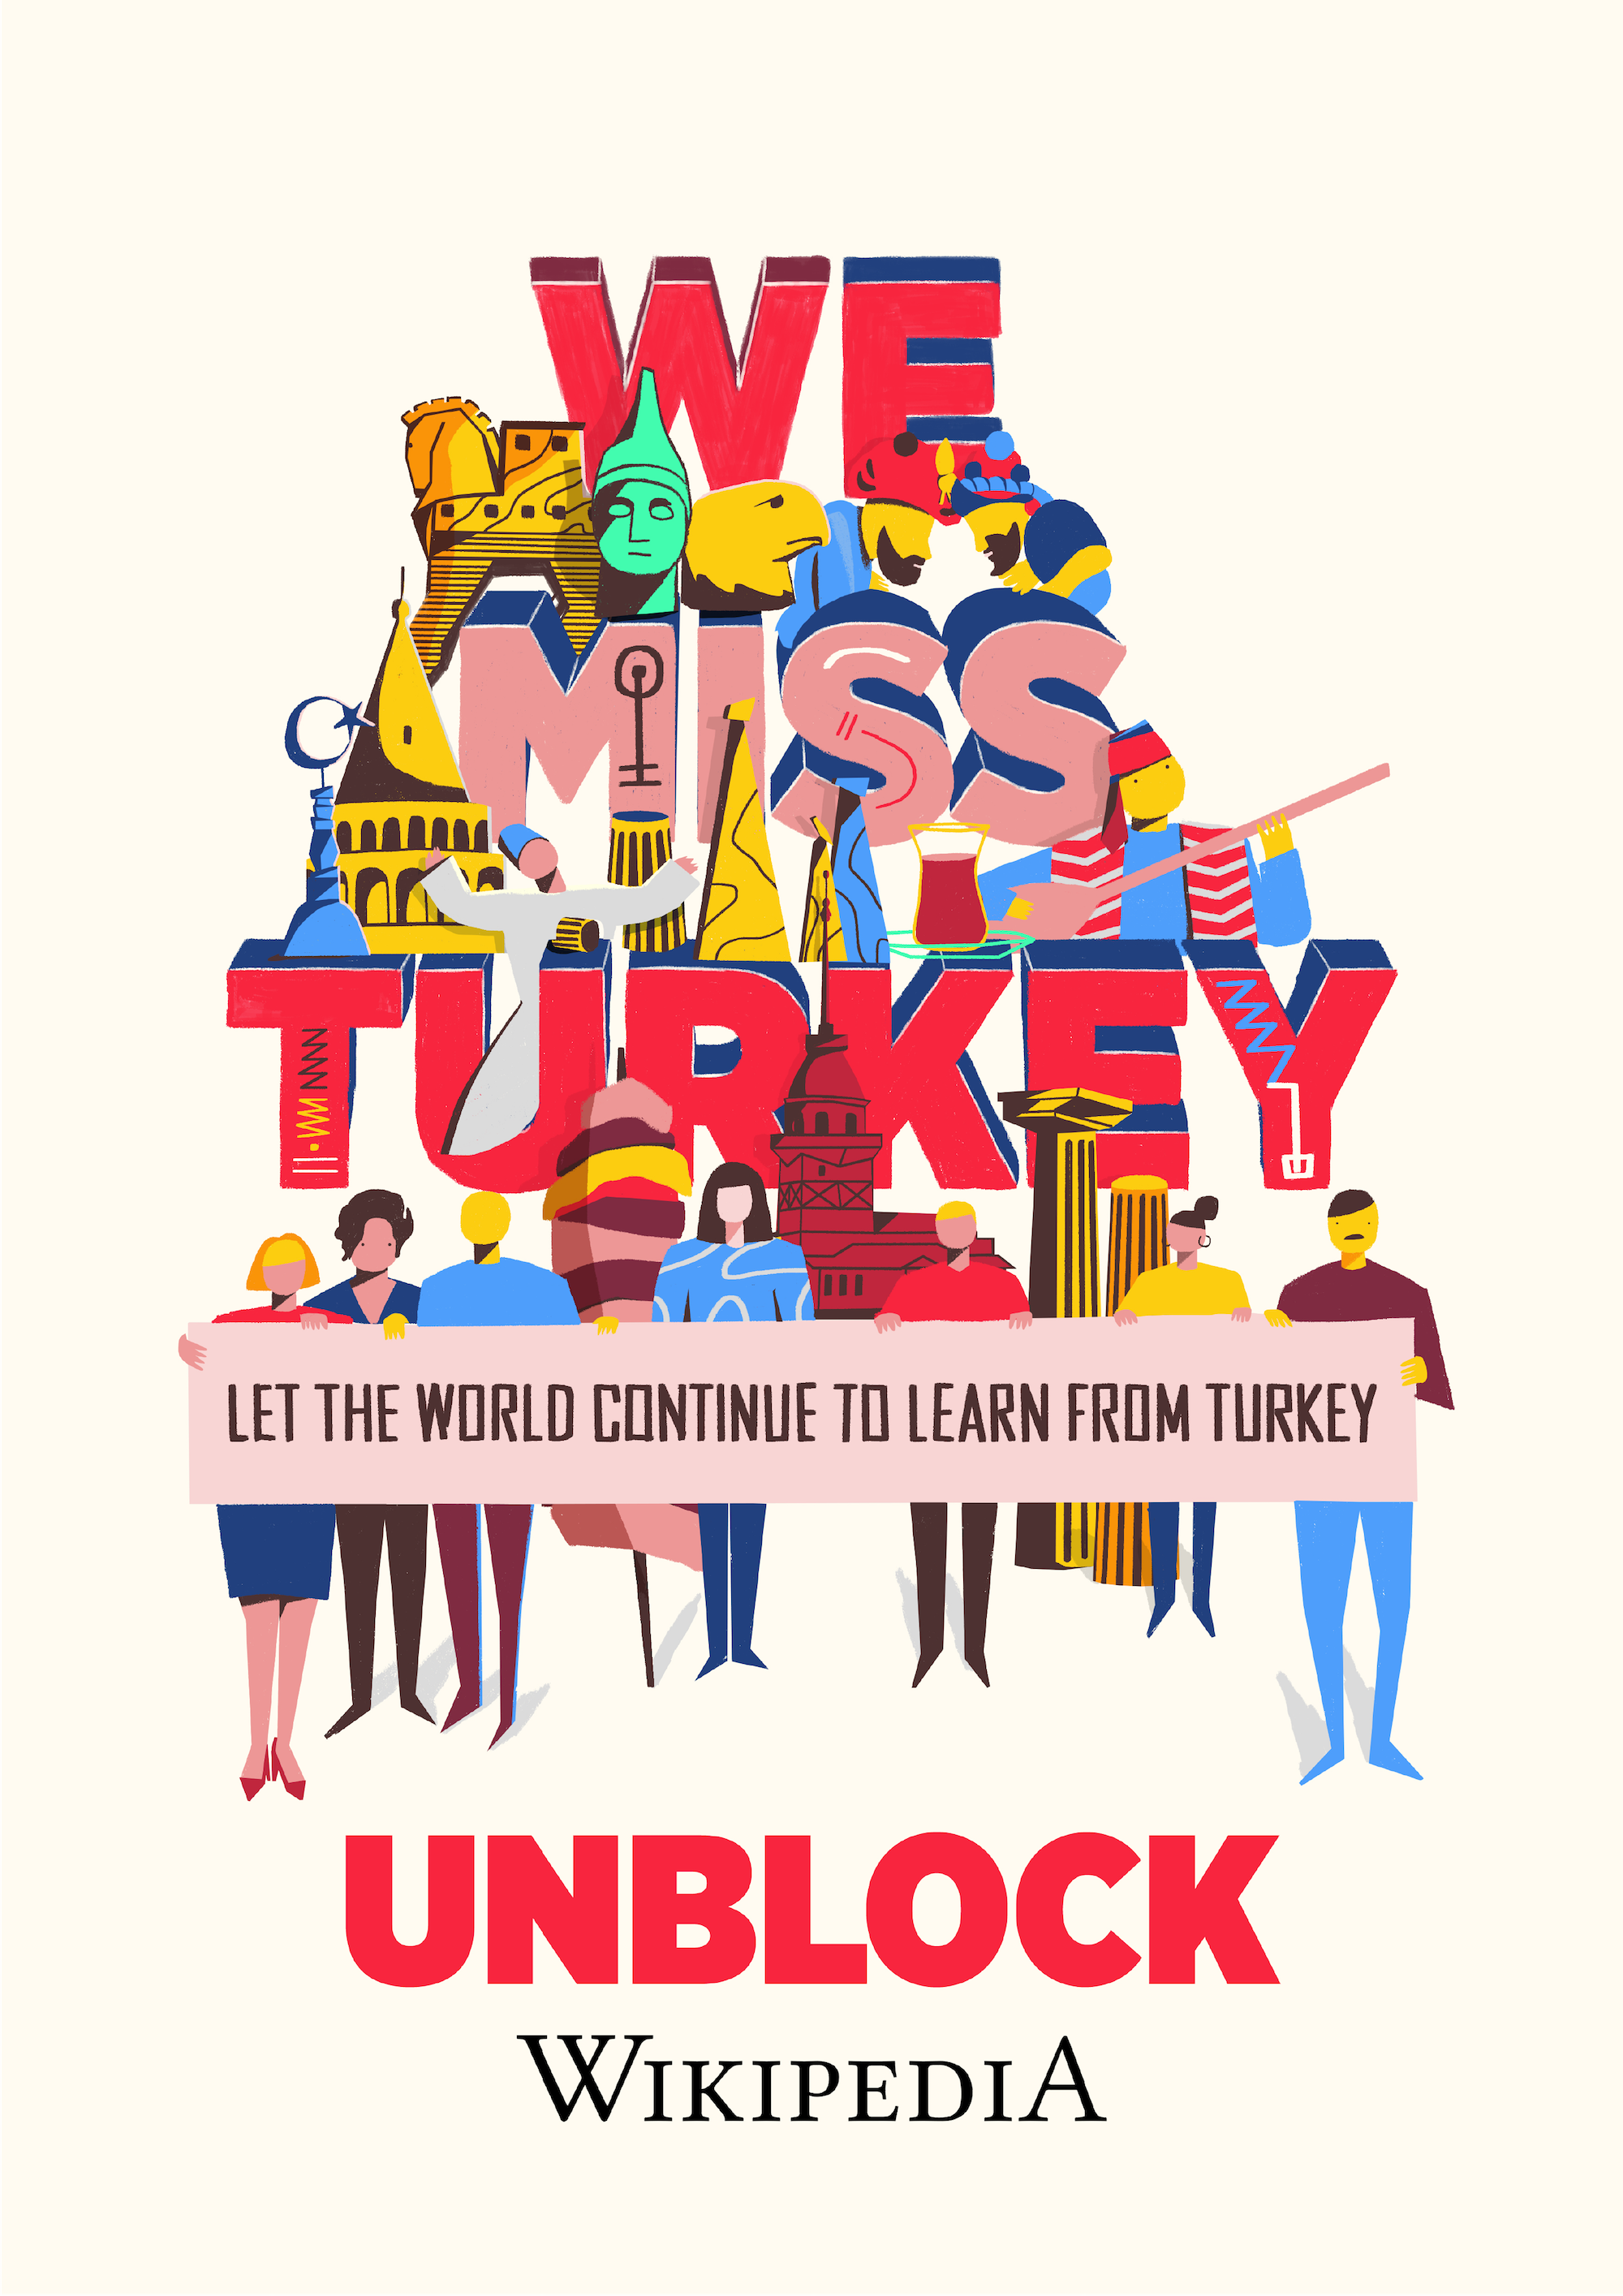 A poster made by Turkish artist Büşra Üzgün to support the "We Miss Turkey" campaign of March 2018. This work was commissioned by the Wikimedia Foundation and has been licensed accordingly under Creative Commons